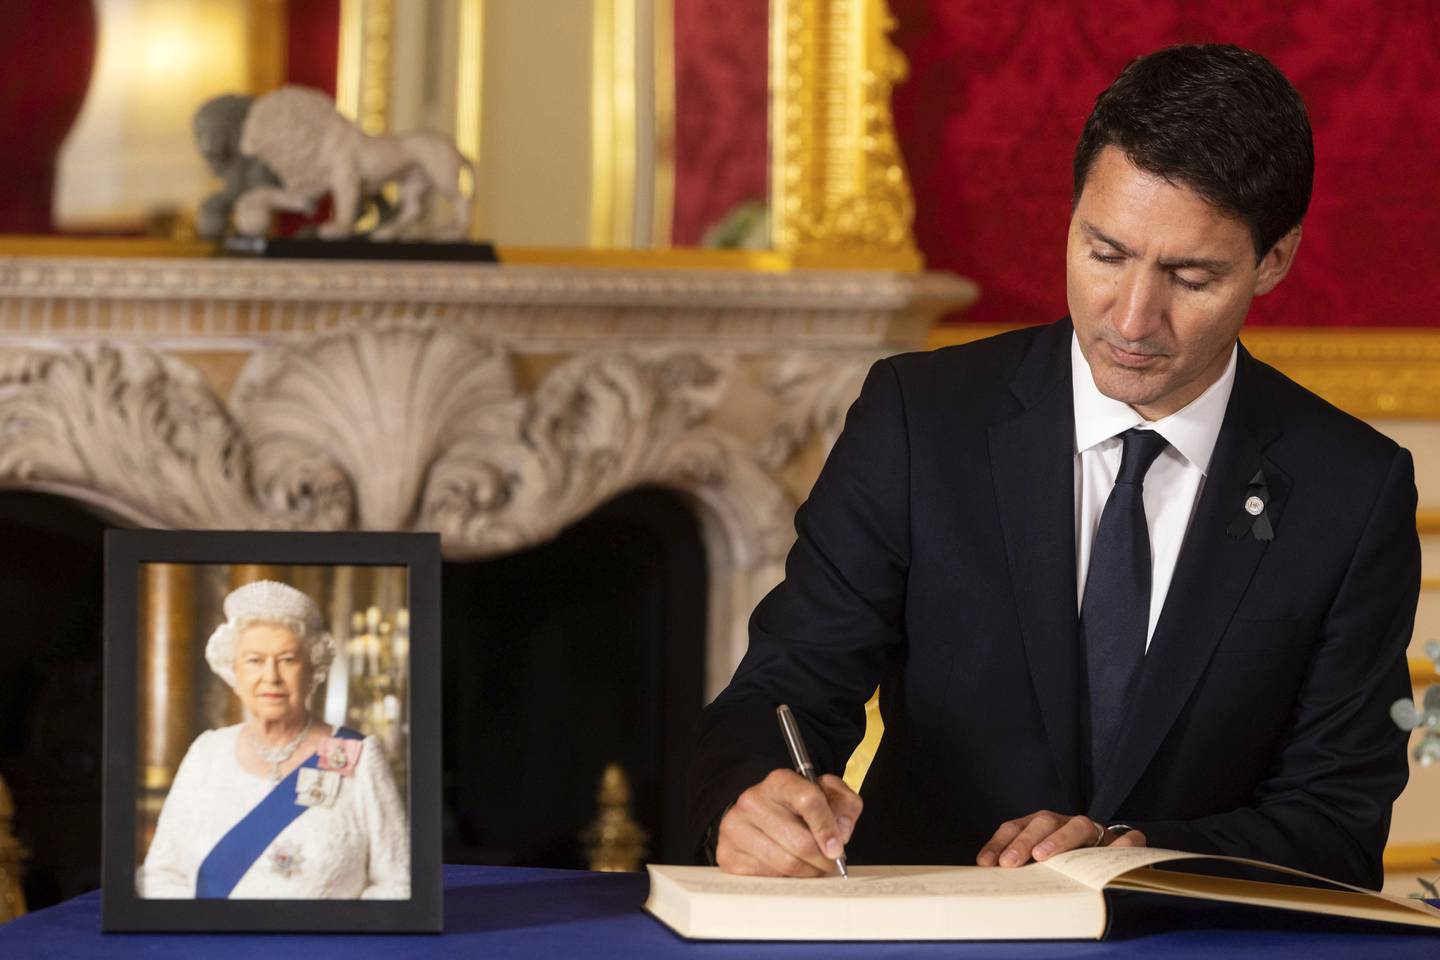 Prime Minister Justin Trudeau of Canada signs a book of condolence at Lancaster House, in London. AP